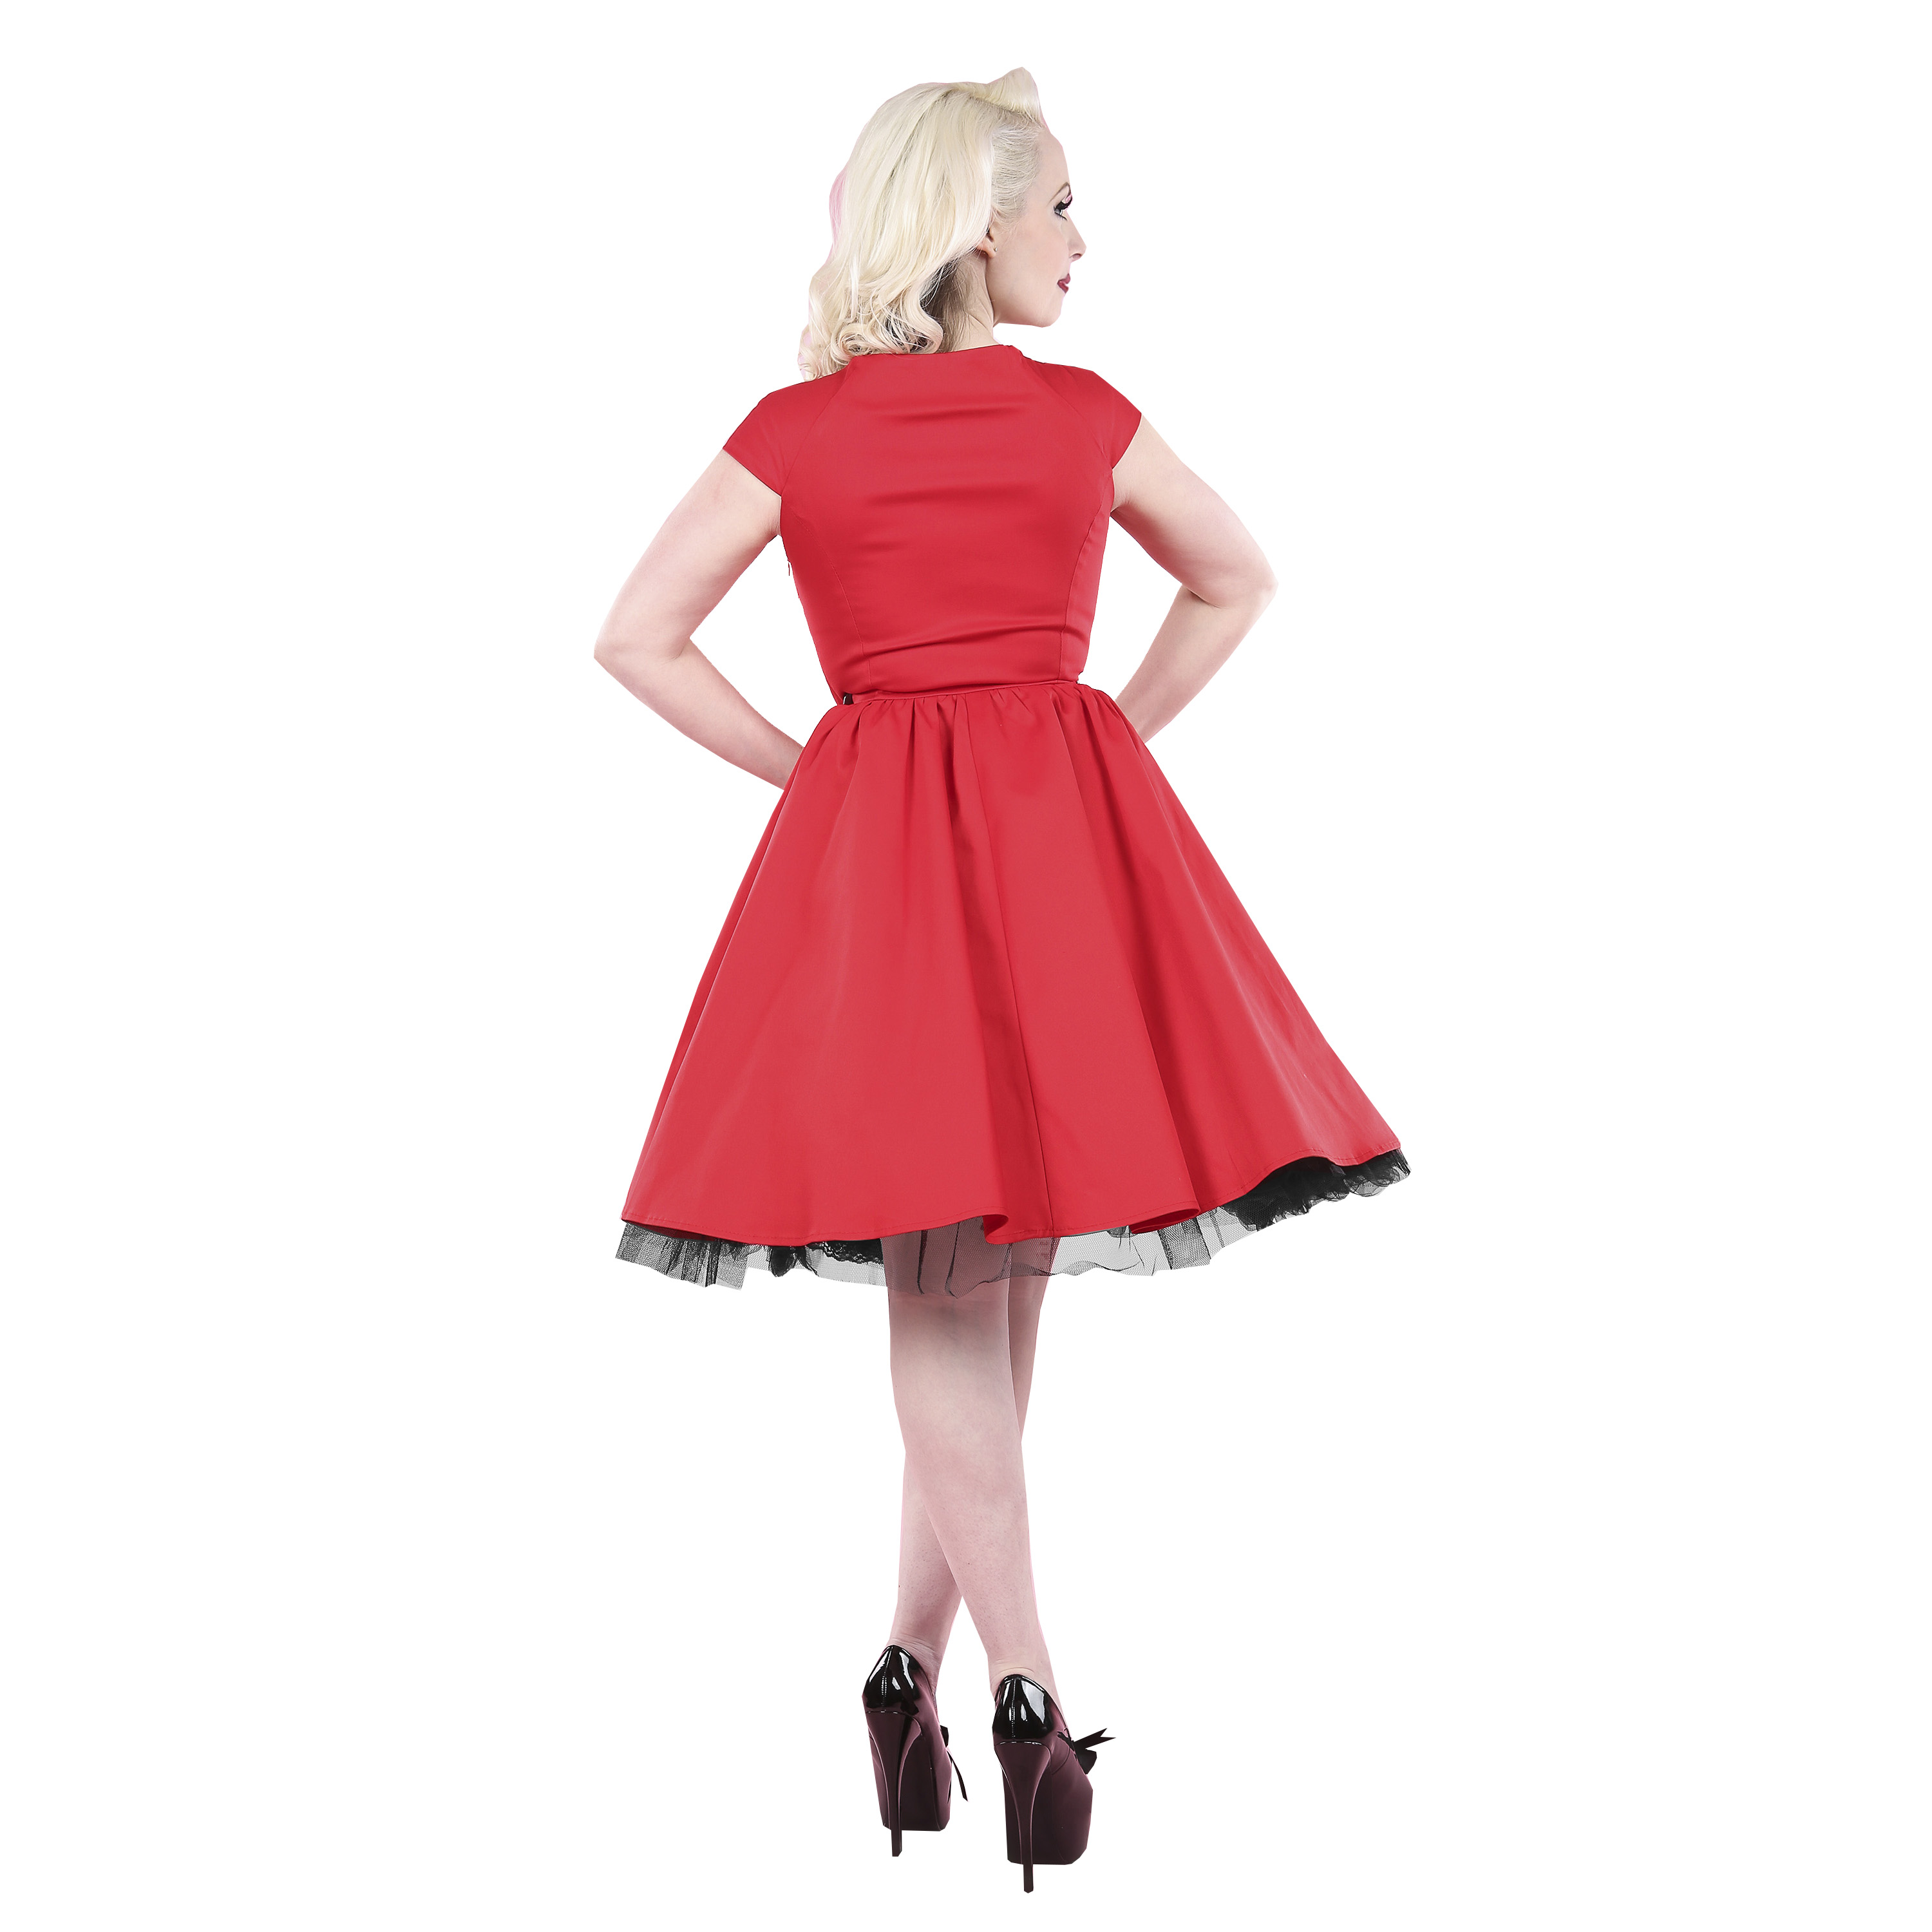 Rkh51 Hearts And Roses Flared Pin Up Party Rockabilly Dress 50s Vintage Swing Ebay 